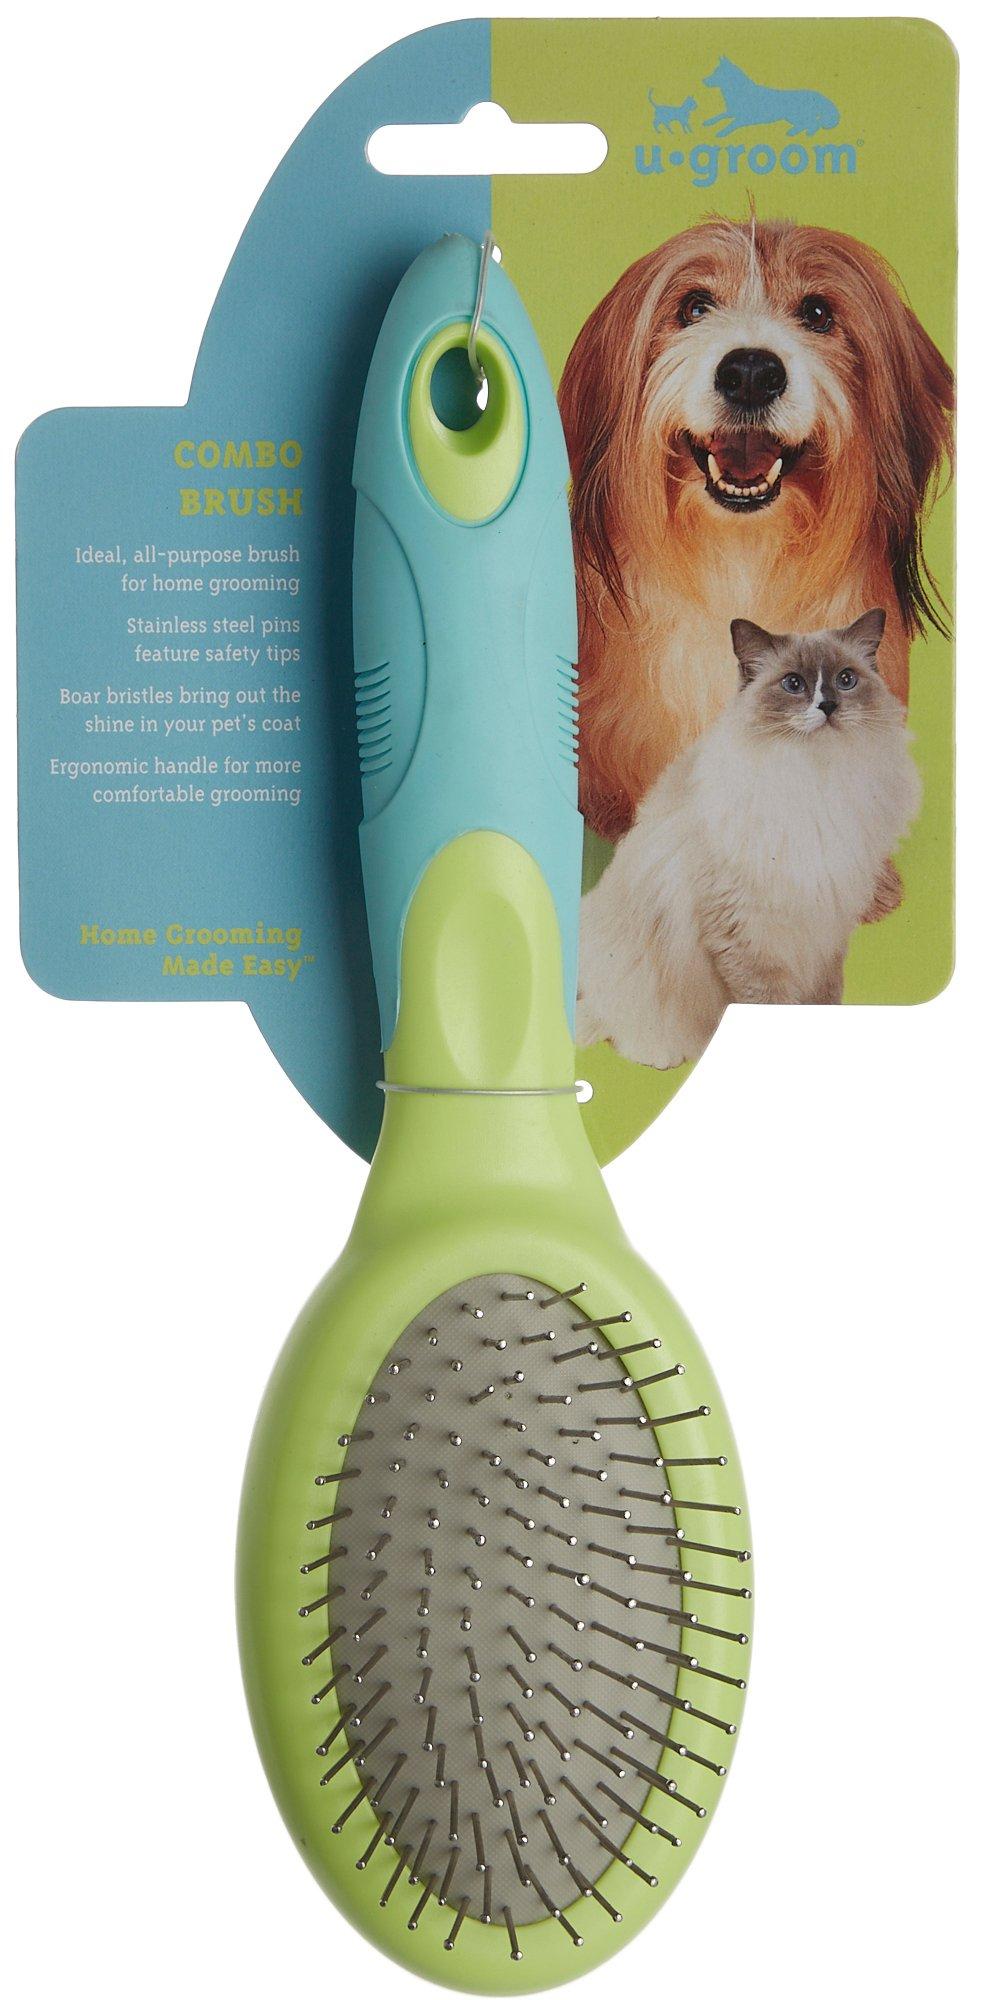 Combo Brush For Pets